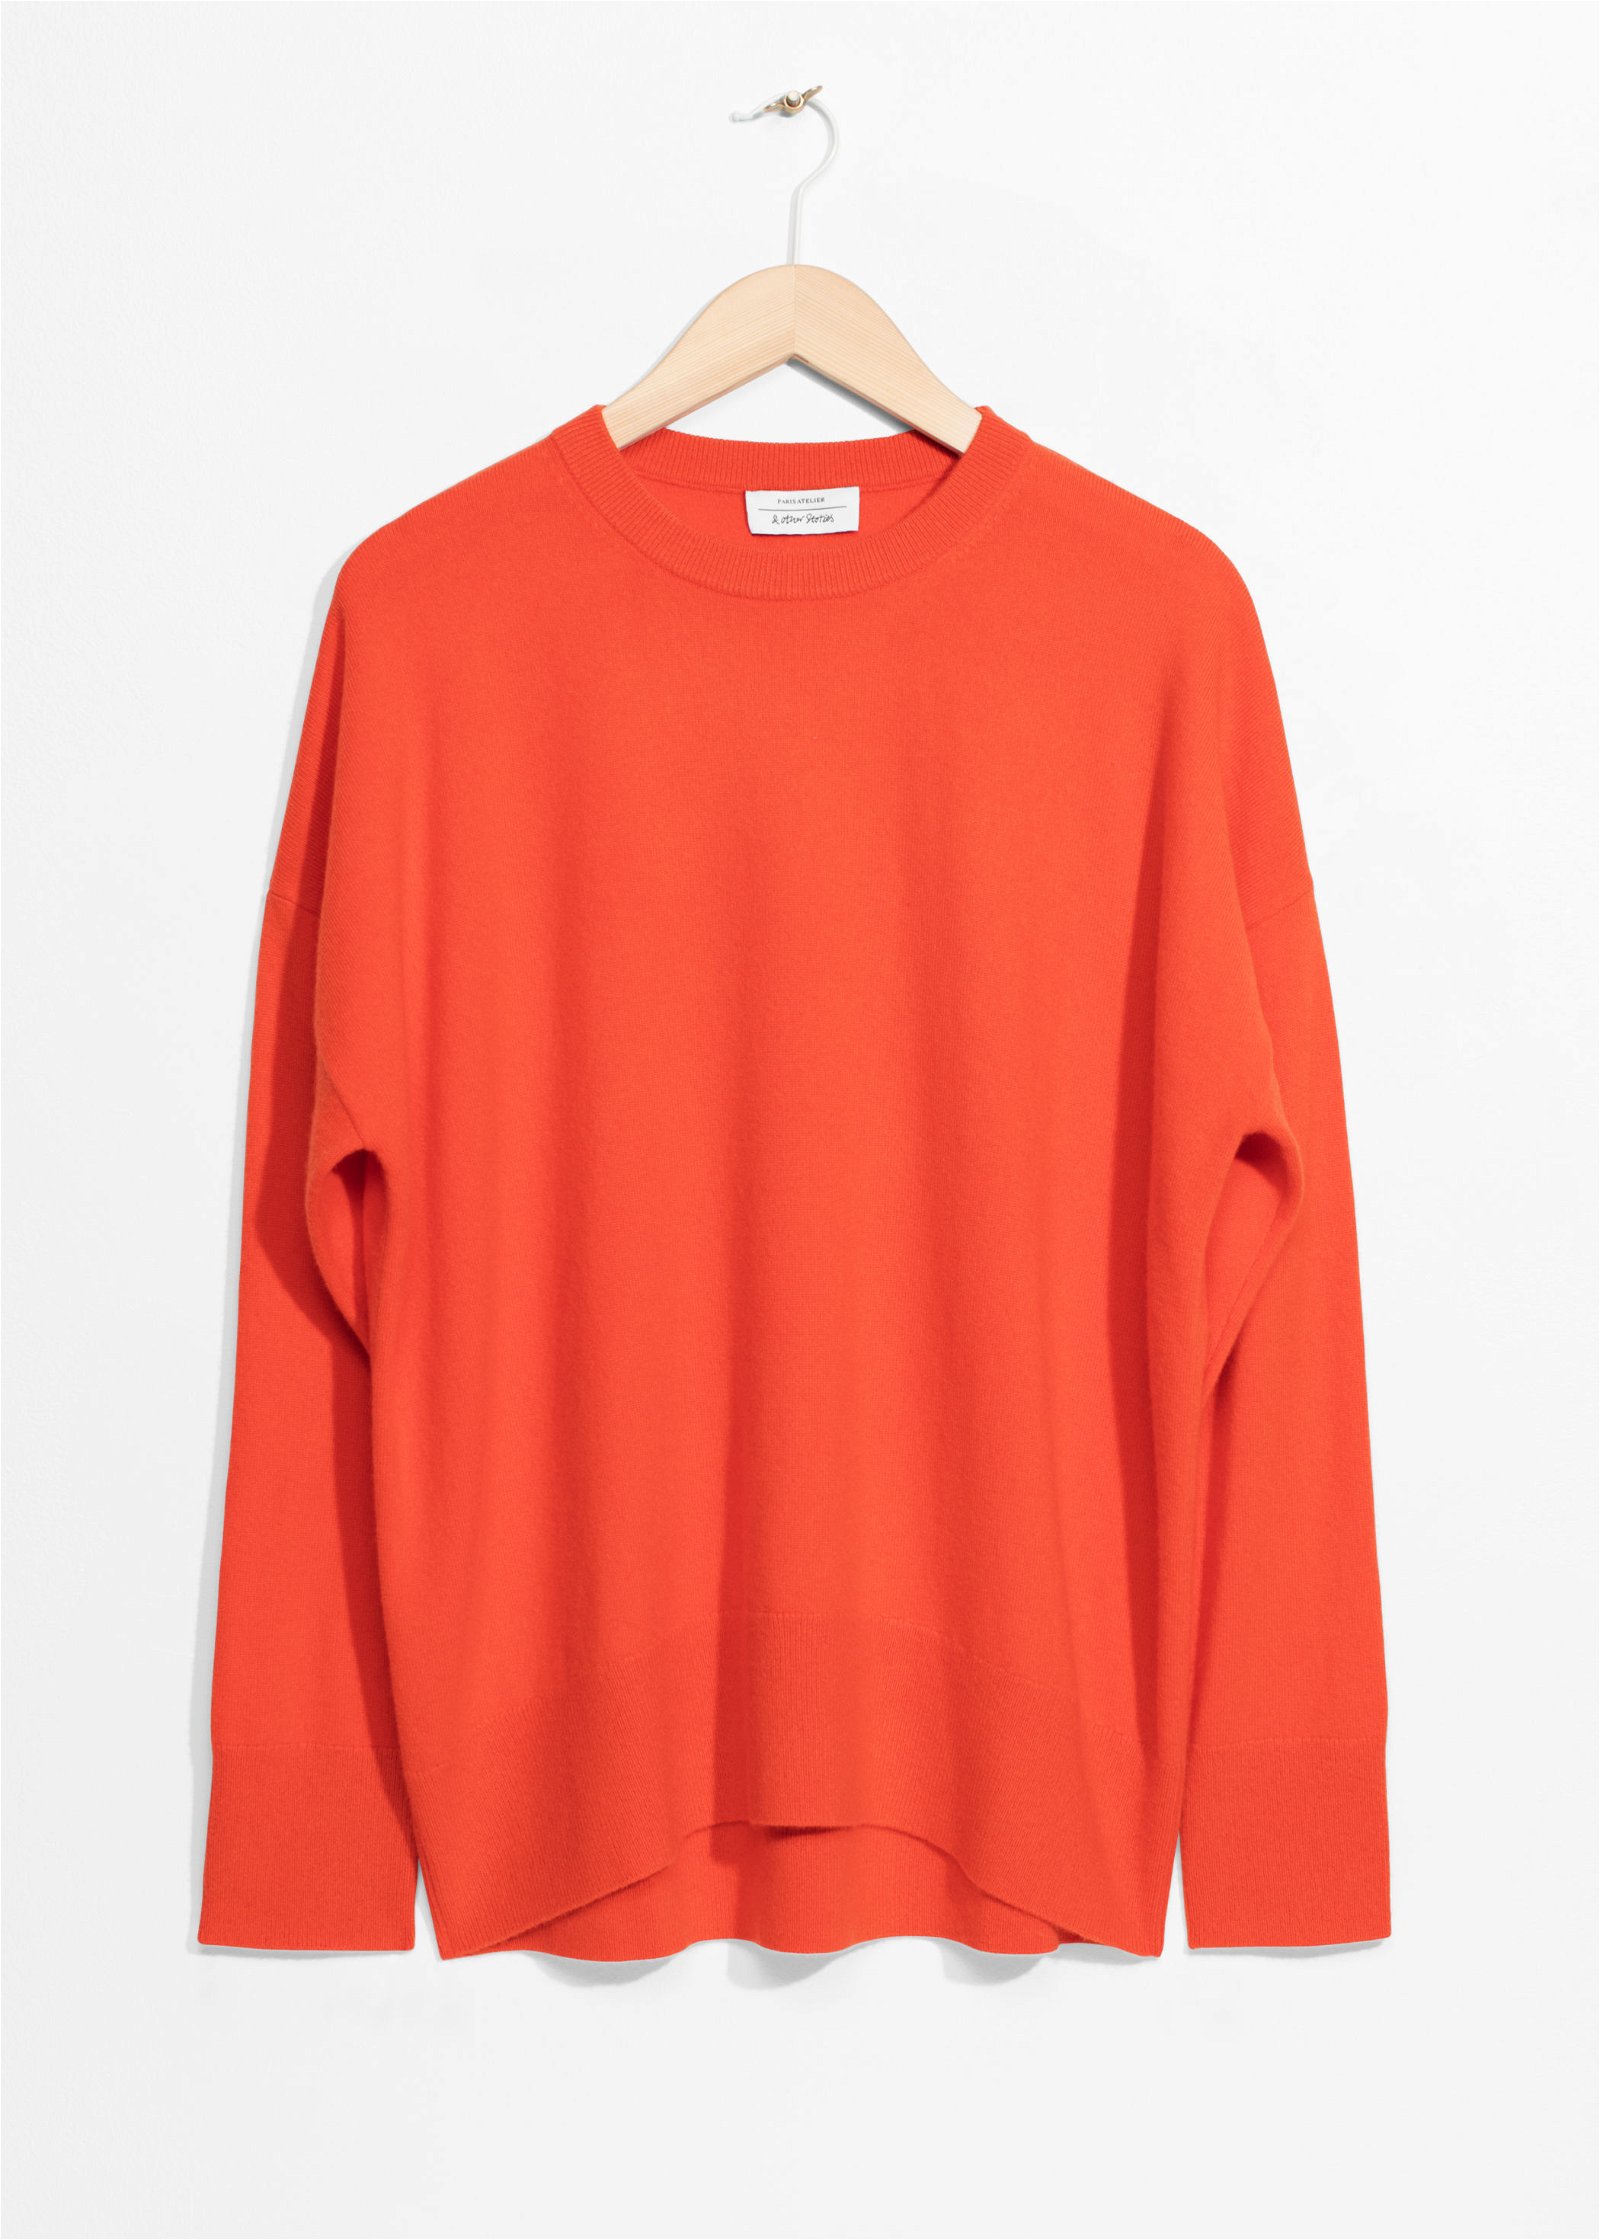 & OTHER STORIES Cashmere Sweater | Endource